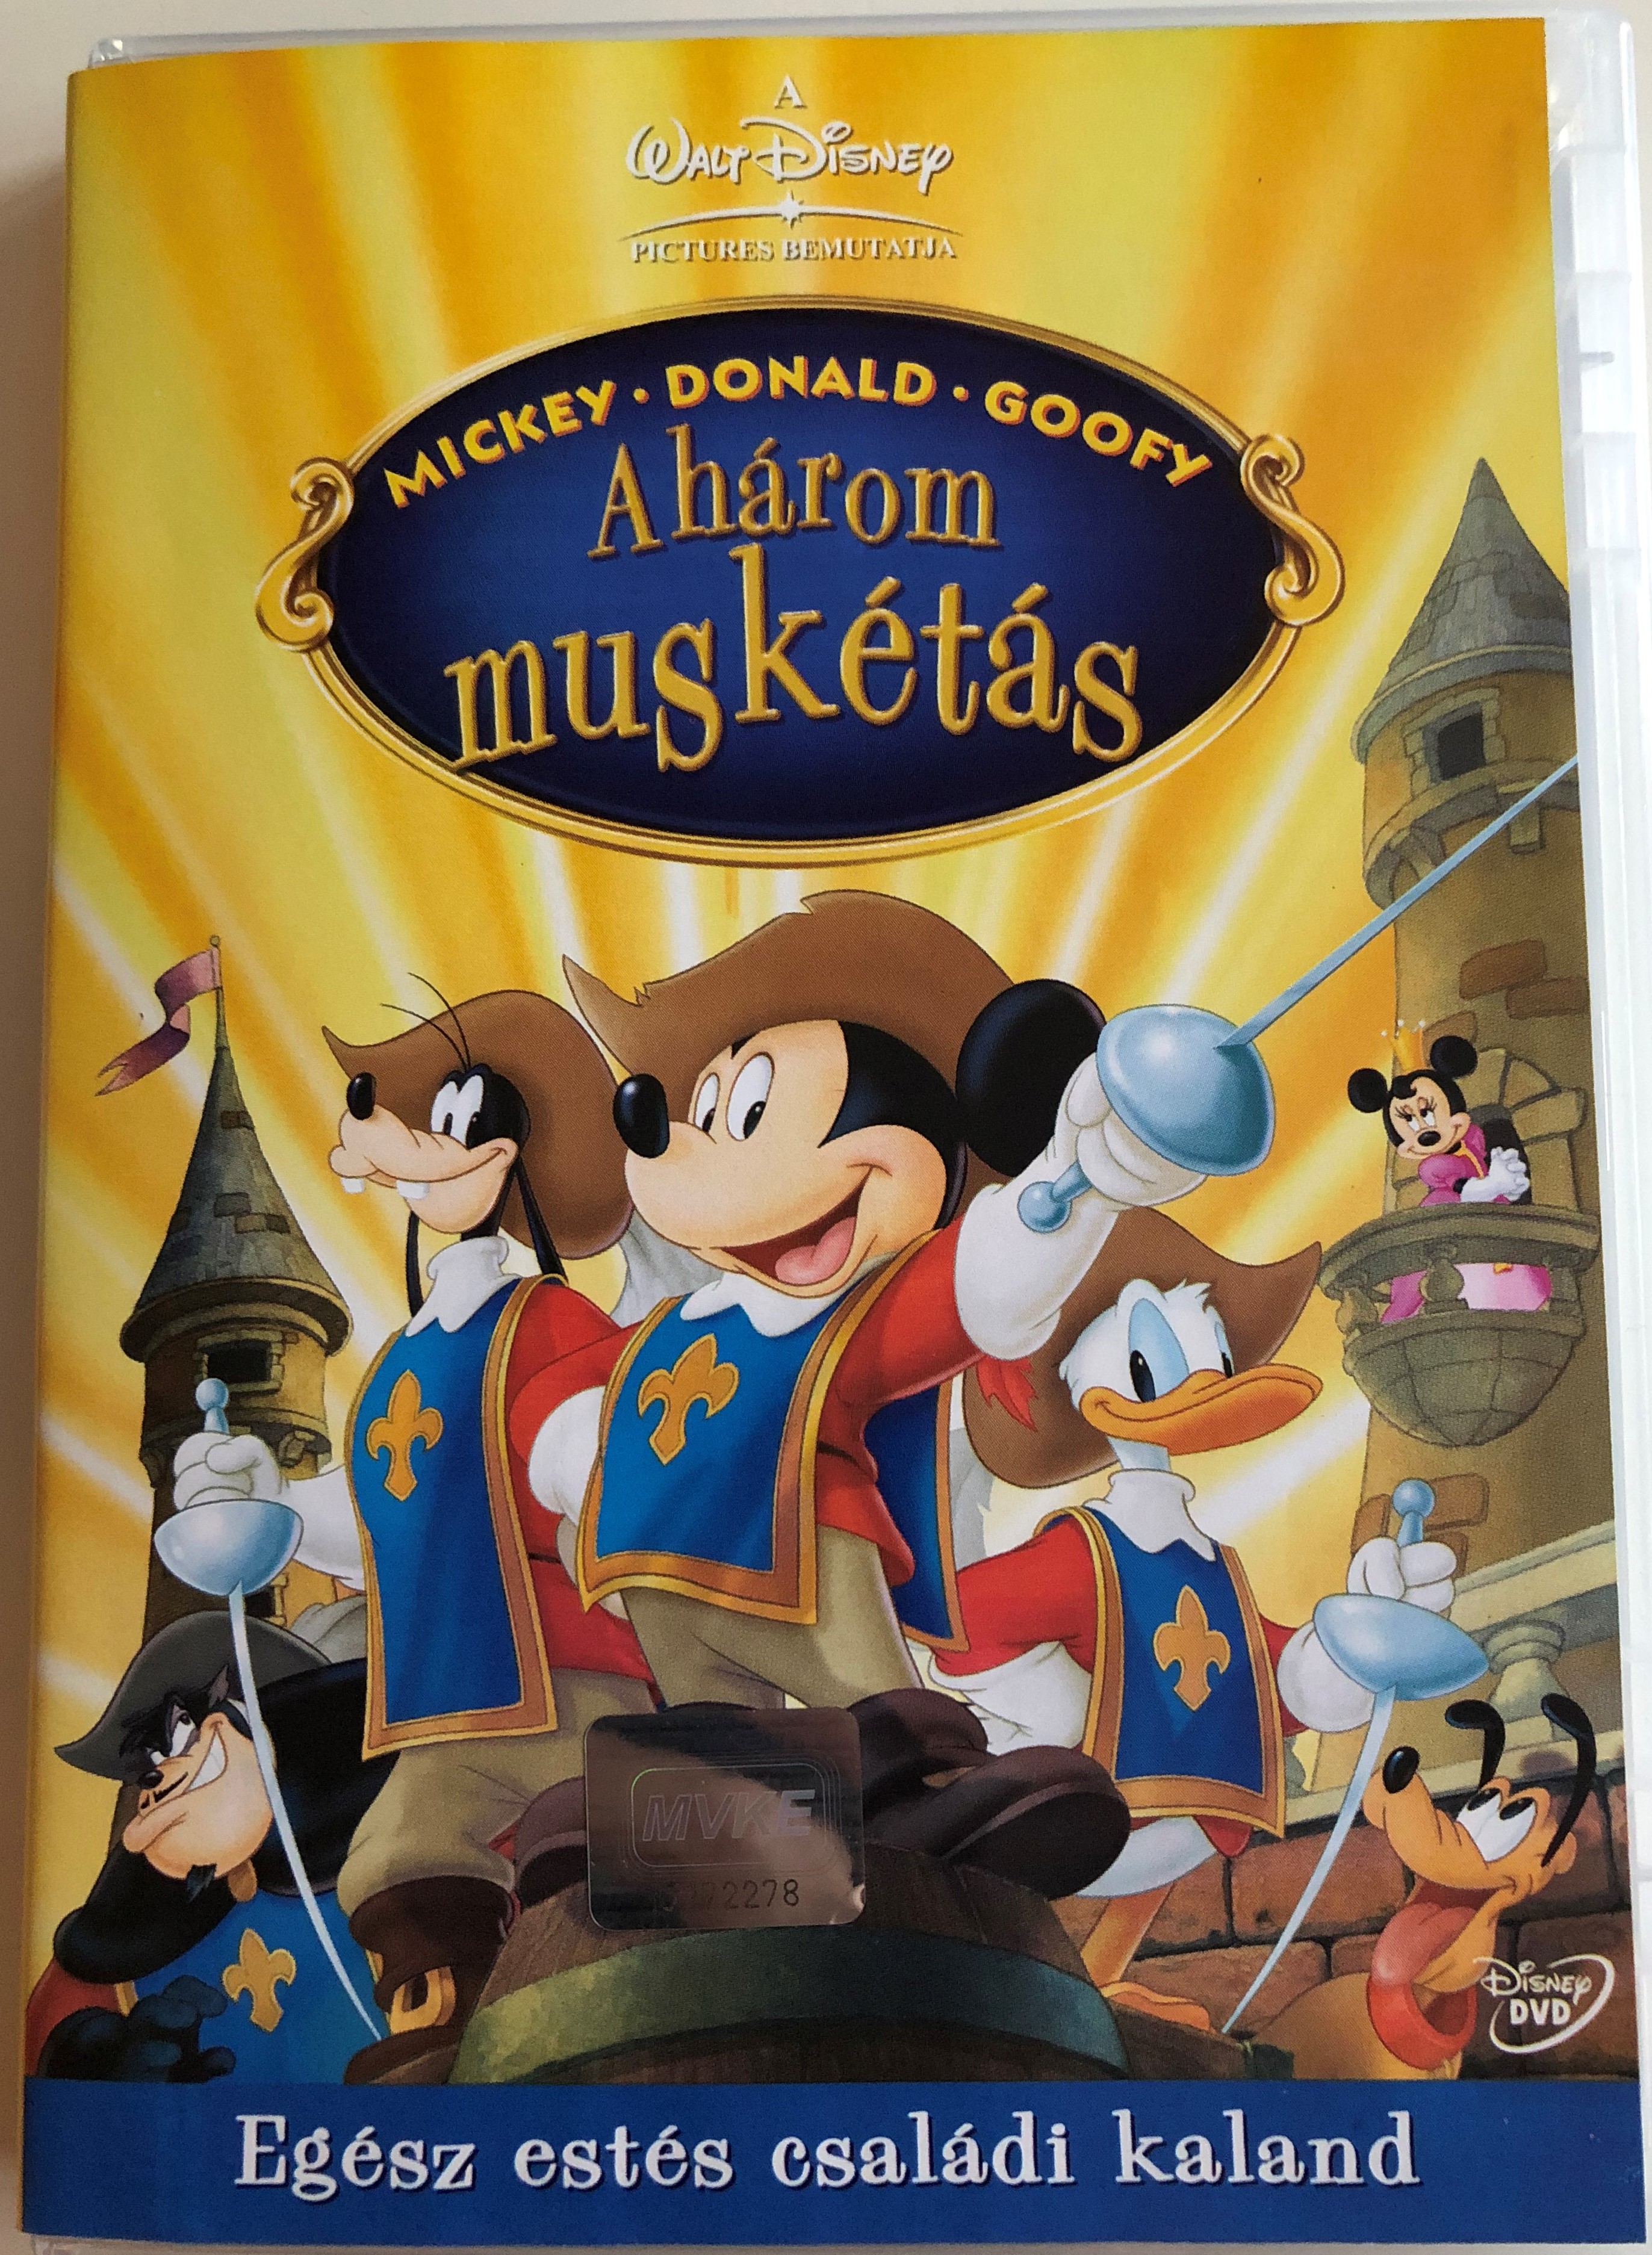 Mickey-Donald-Goofy: The Three Musketeers DVD 2004 A három muskétás /  Directed by Donovan Cook / Starring: Wayne Allwine, Tony Anselmo, Bill  Farmer, Russi Taylor - Bible in My Language